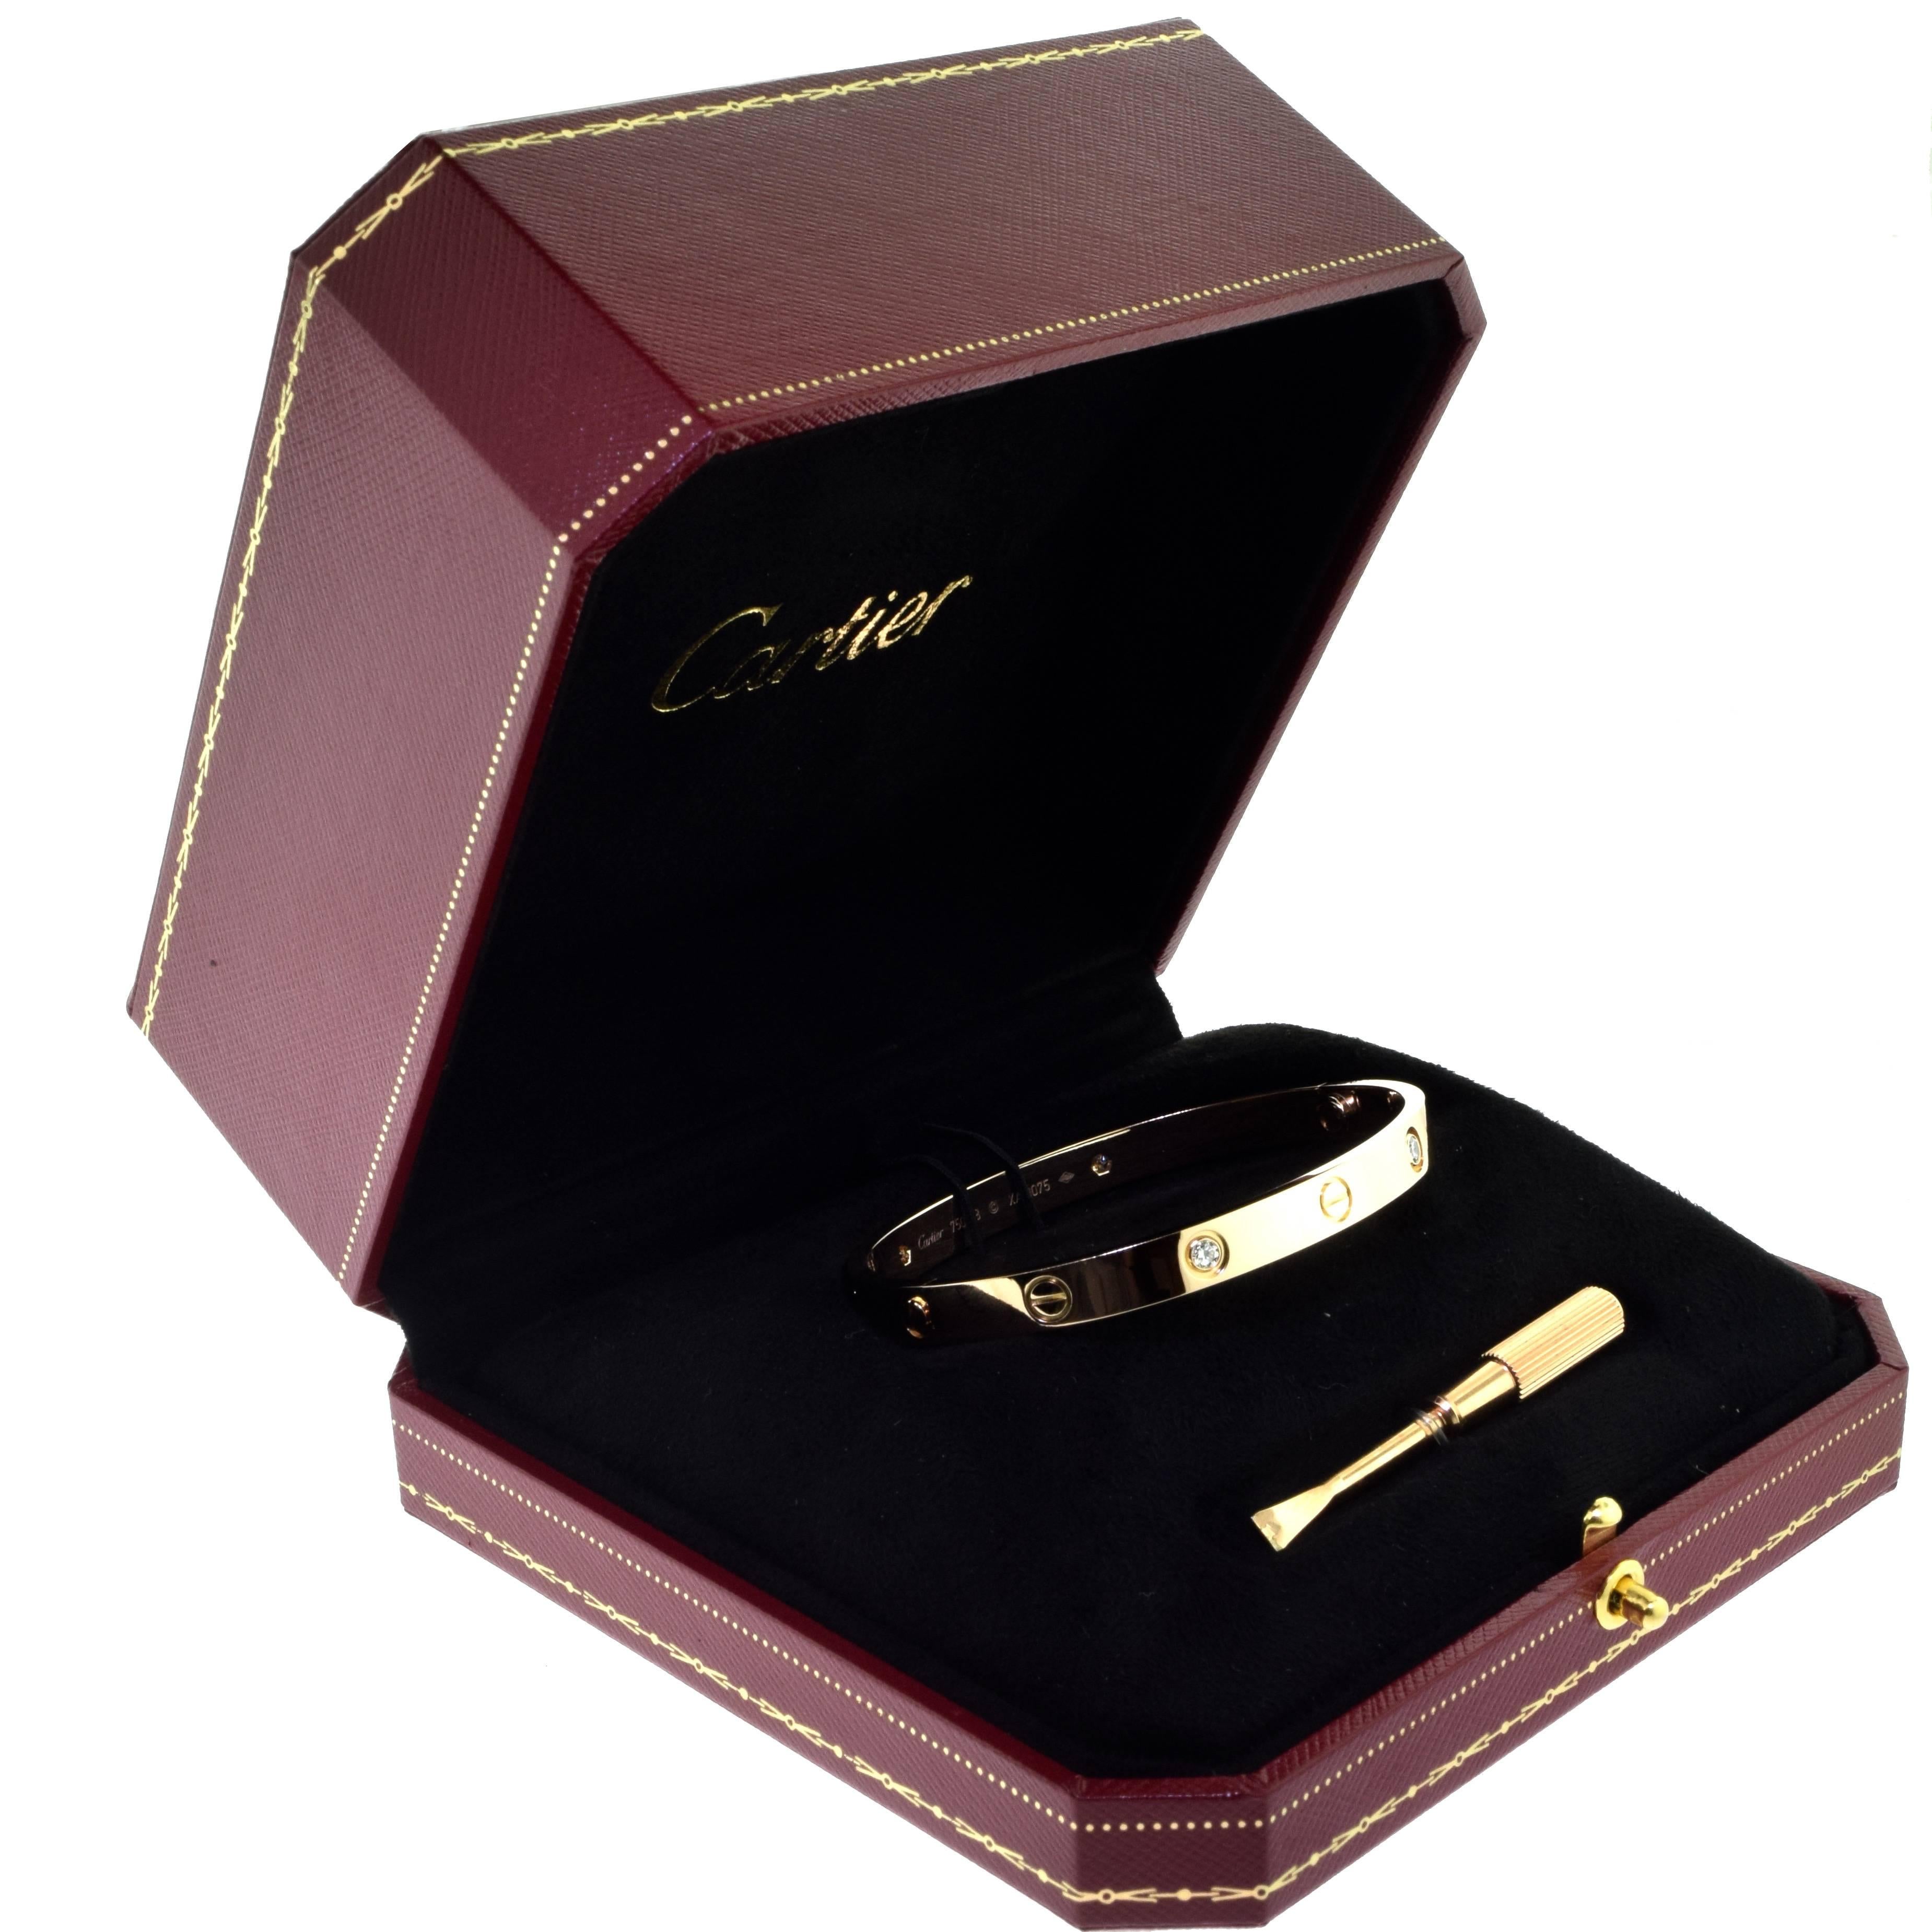 From Cartier's LOVE Collection:

Bracelet Size: 18 = 18 cm
Metal: 18 Karat Rose Gold
Stones: 4 Brilliant Round Cut Diamonds
Total Carat Weight: 0.42 carat
Collateral: Box and Certificate of Authenticity
Hallmark: Cartier 750 Serial No. 18

This